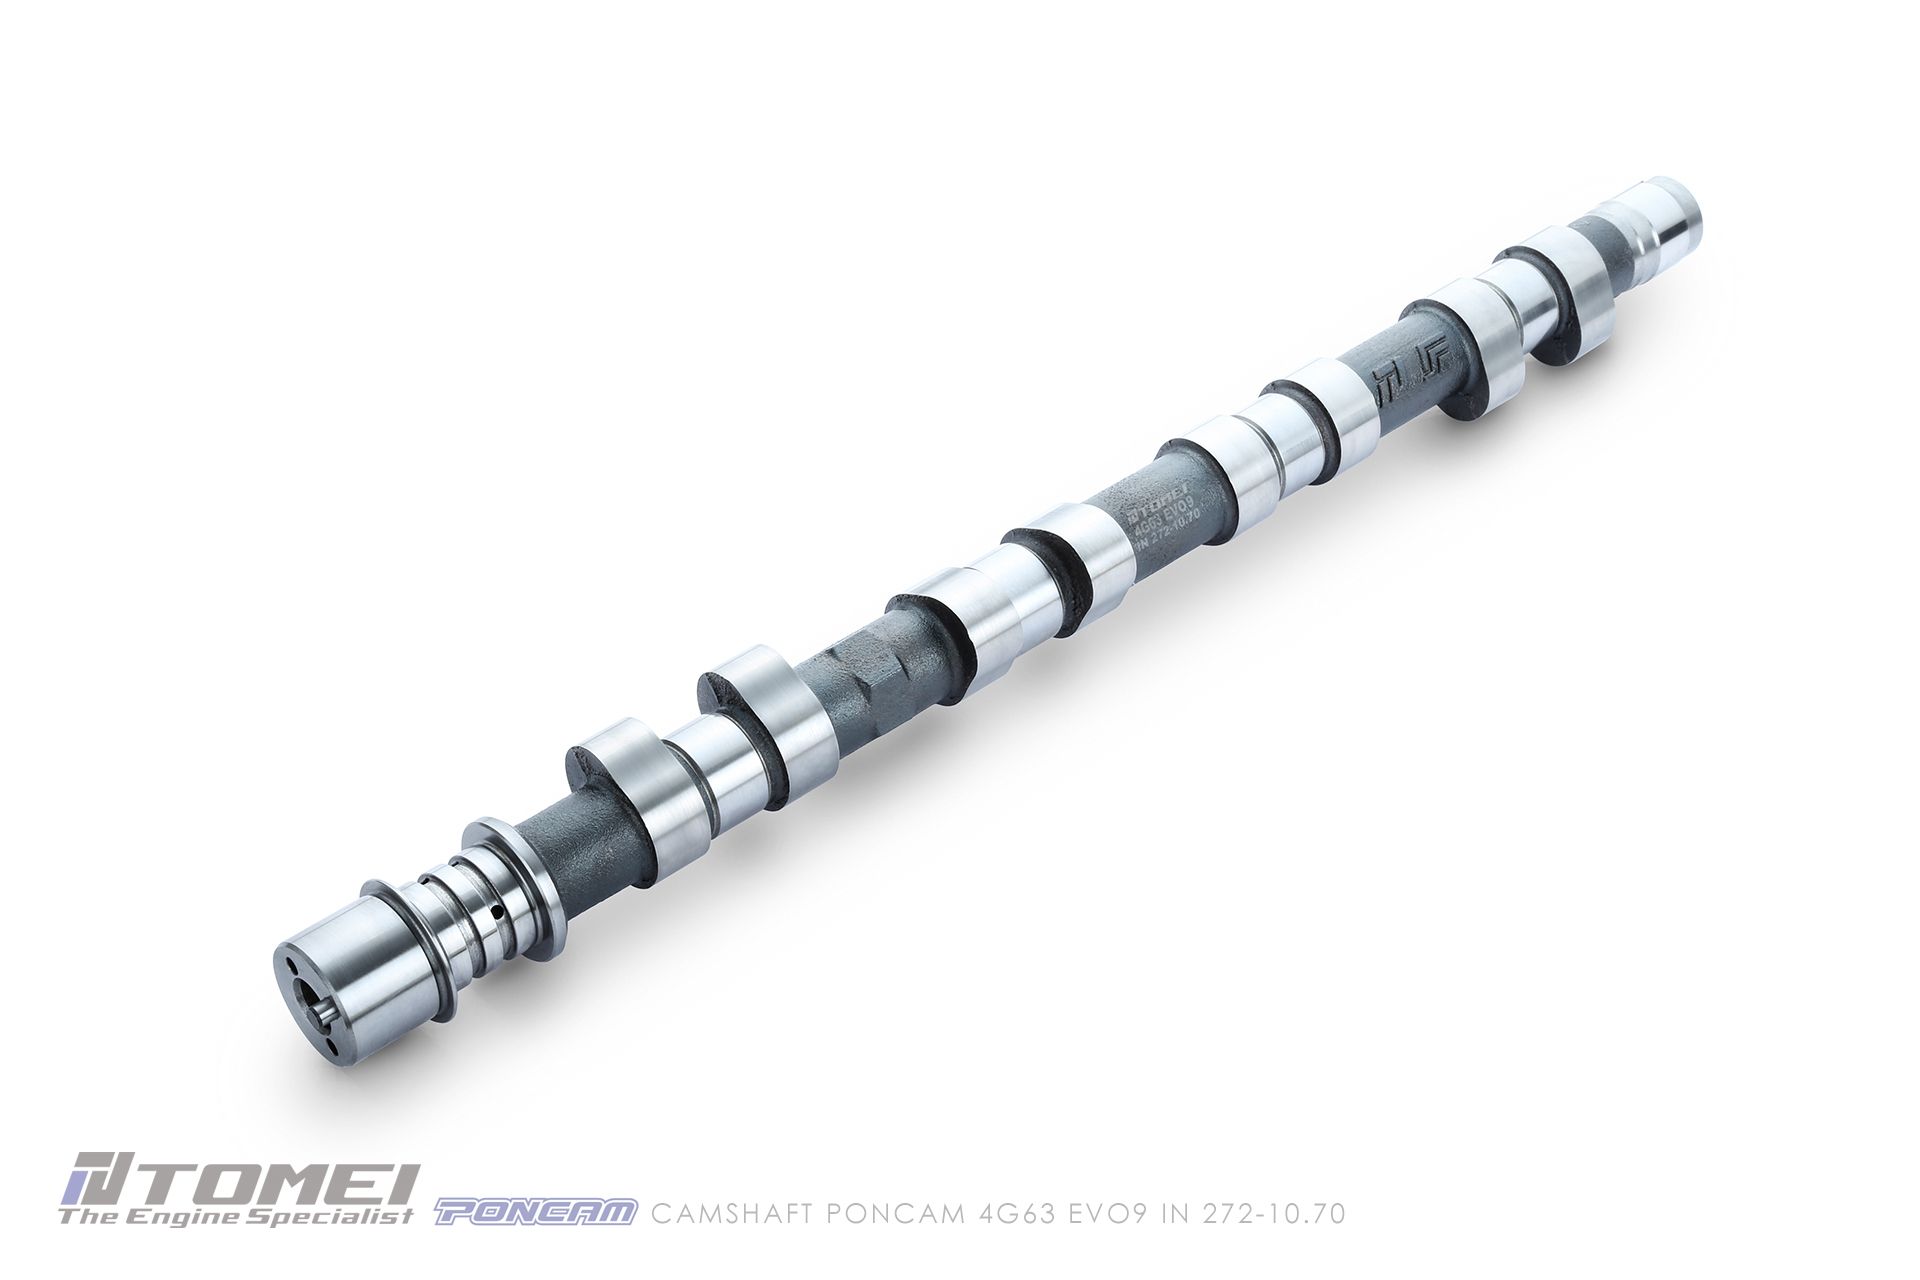 Tomei Camshaft Poncam 4G63 EVO9 IN 272-10.70 